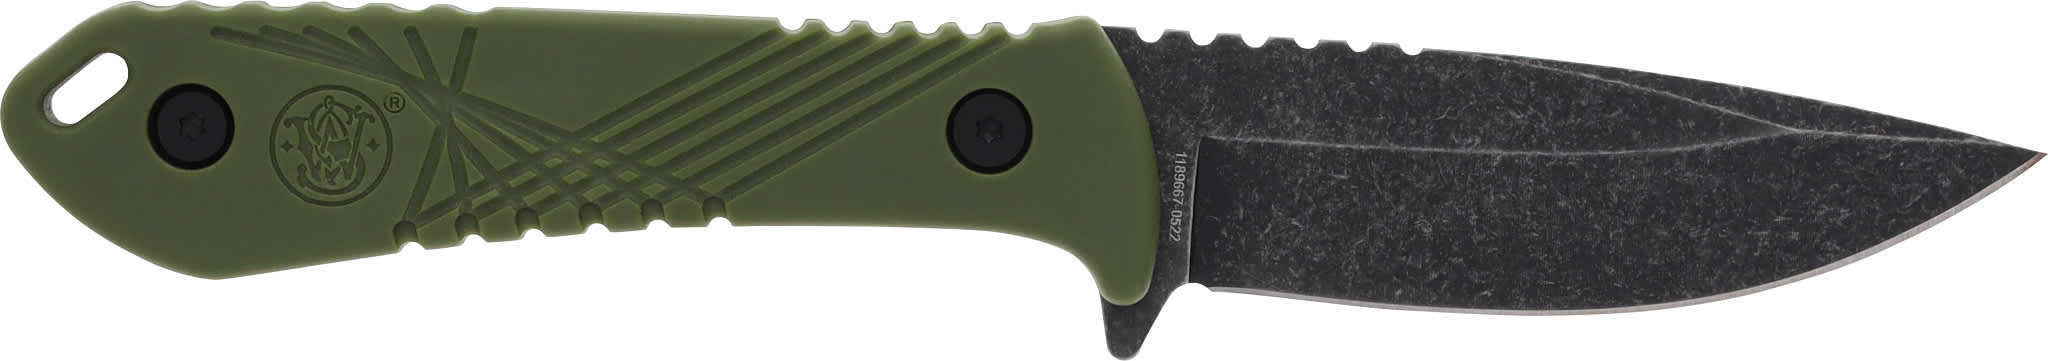 Smith & Wesson Full Tang Drop Point Fixed Blade Knife